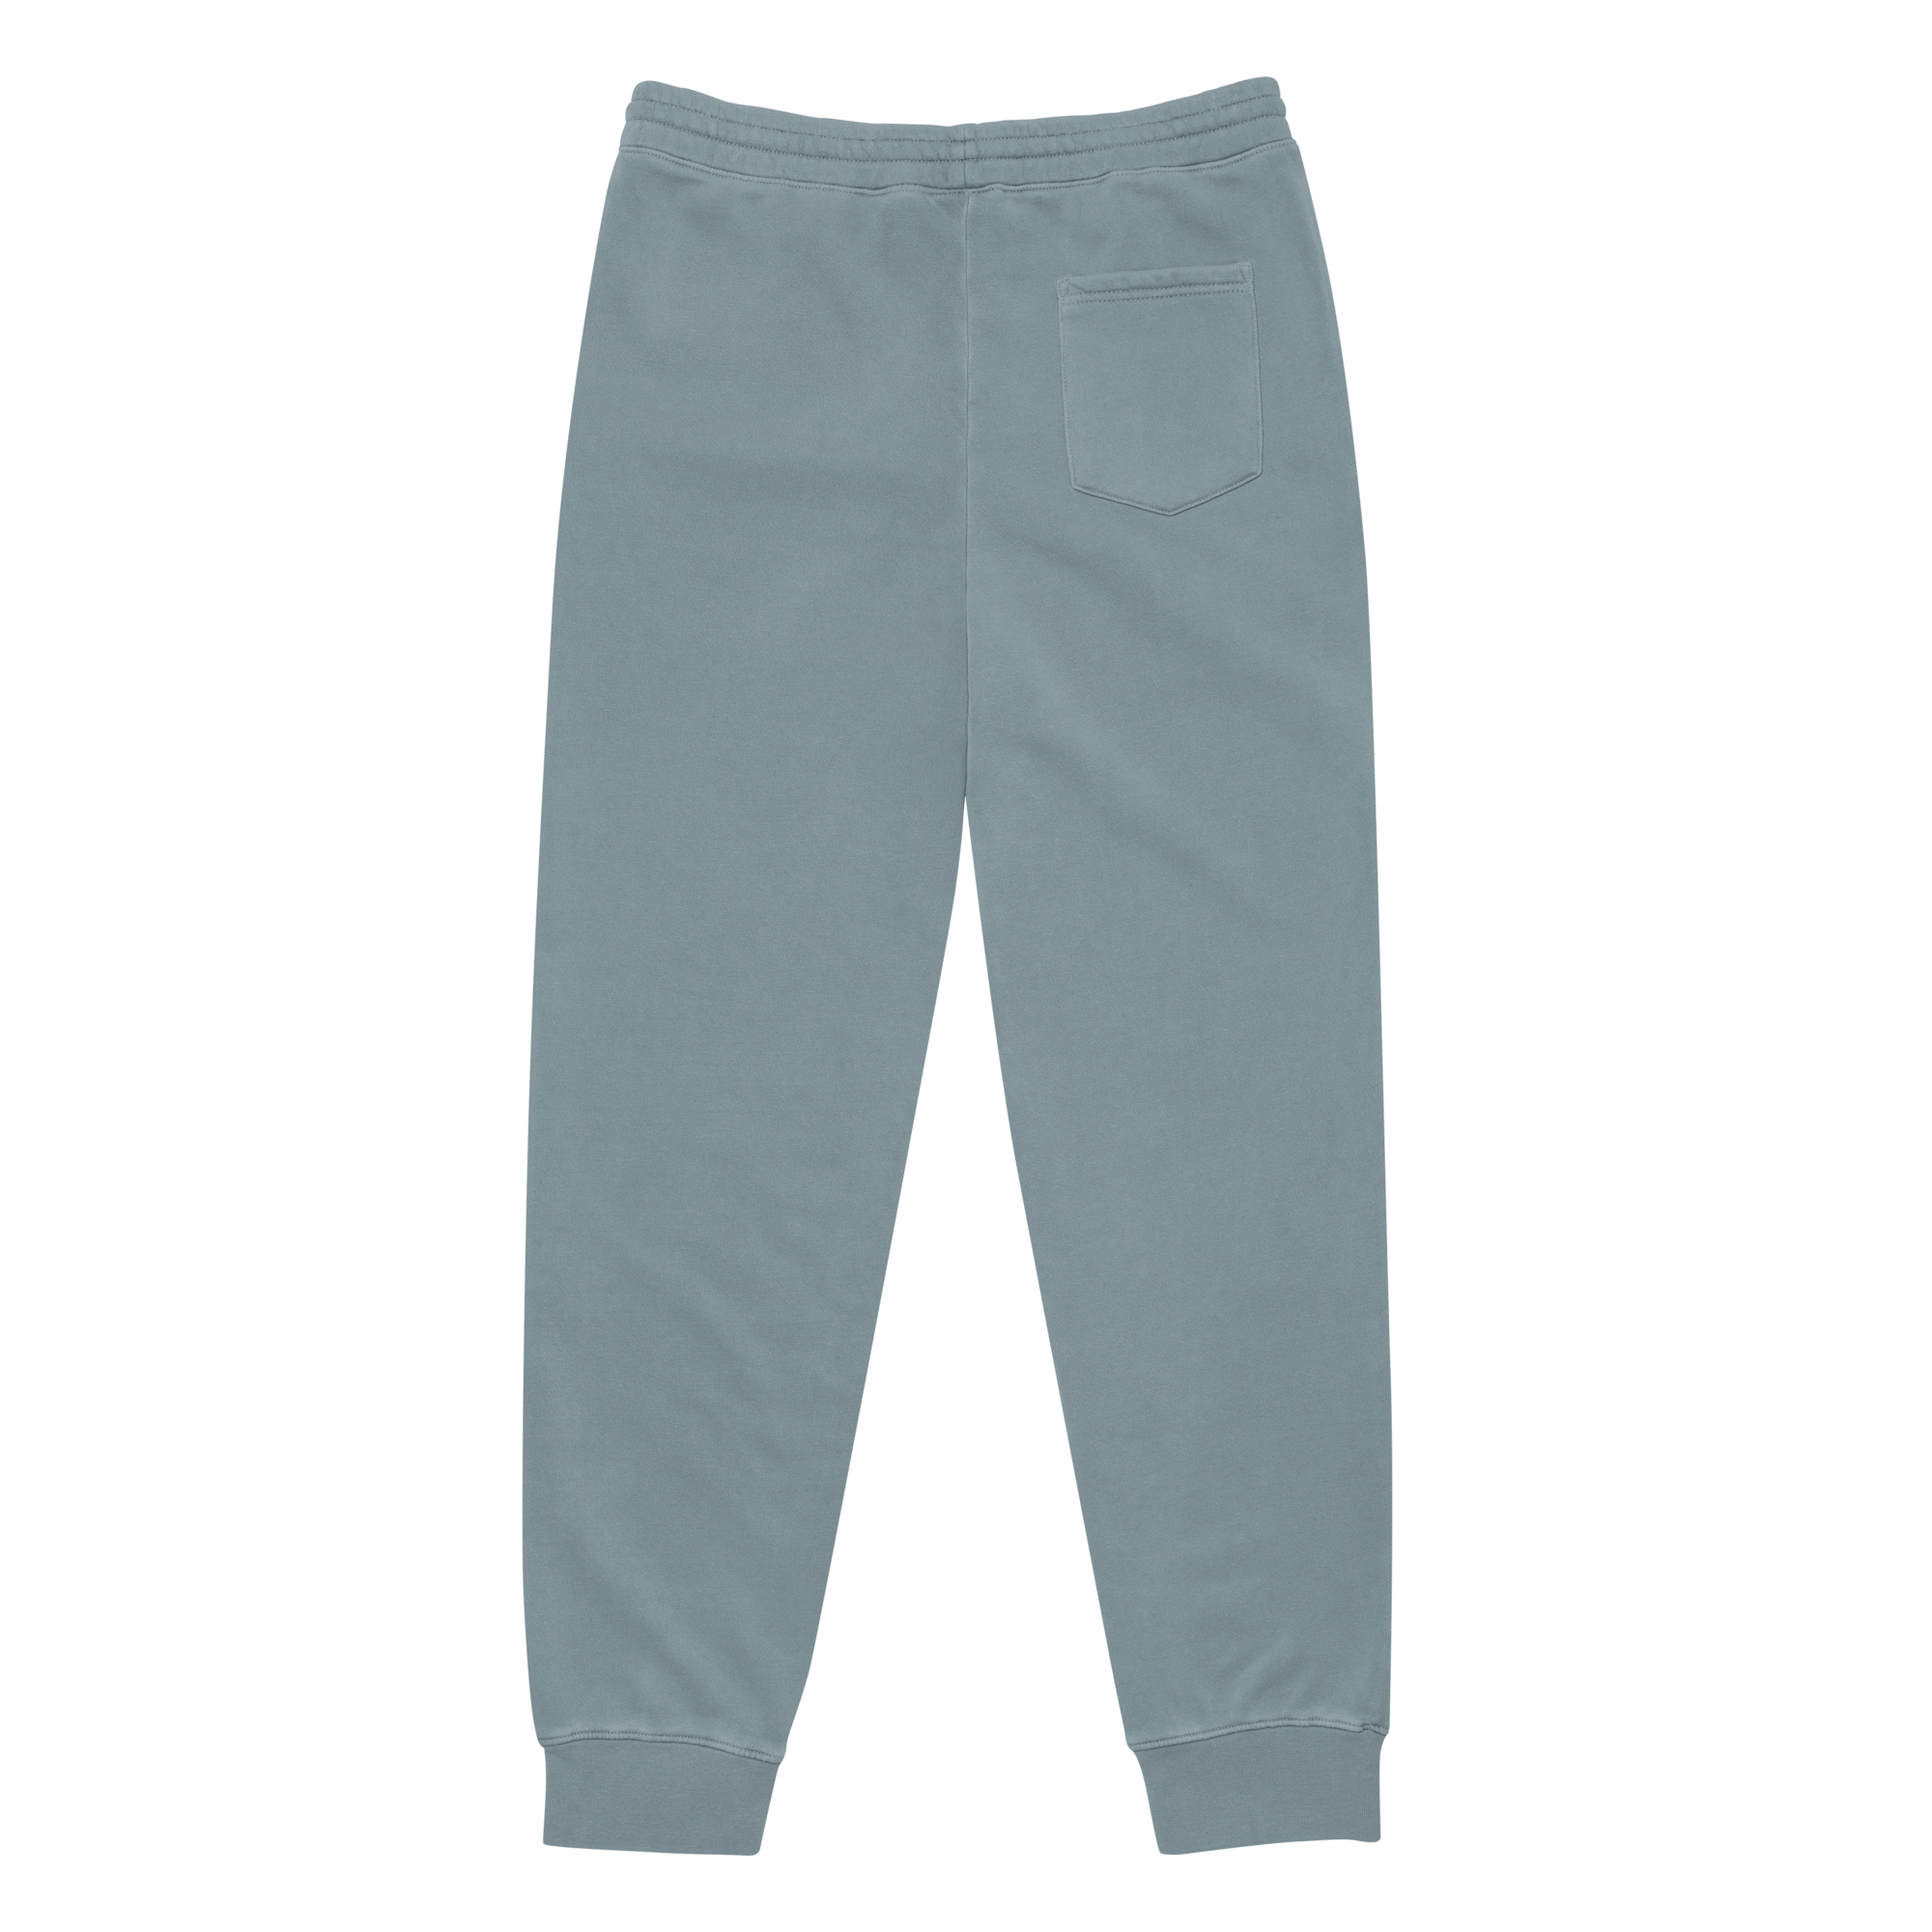 Vintage Cuffed Joggers - FormTheory Athletics